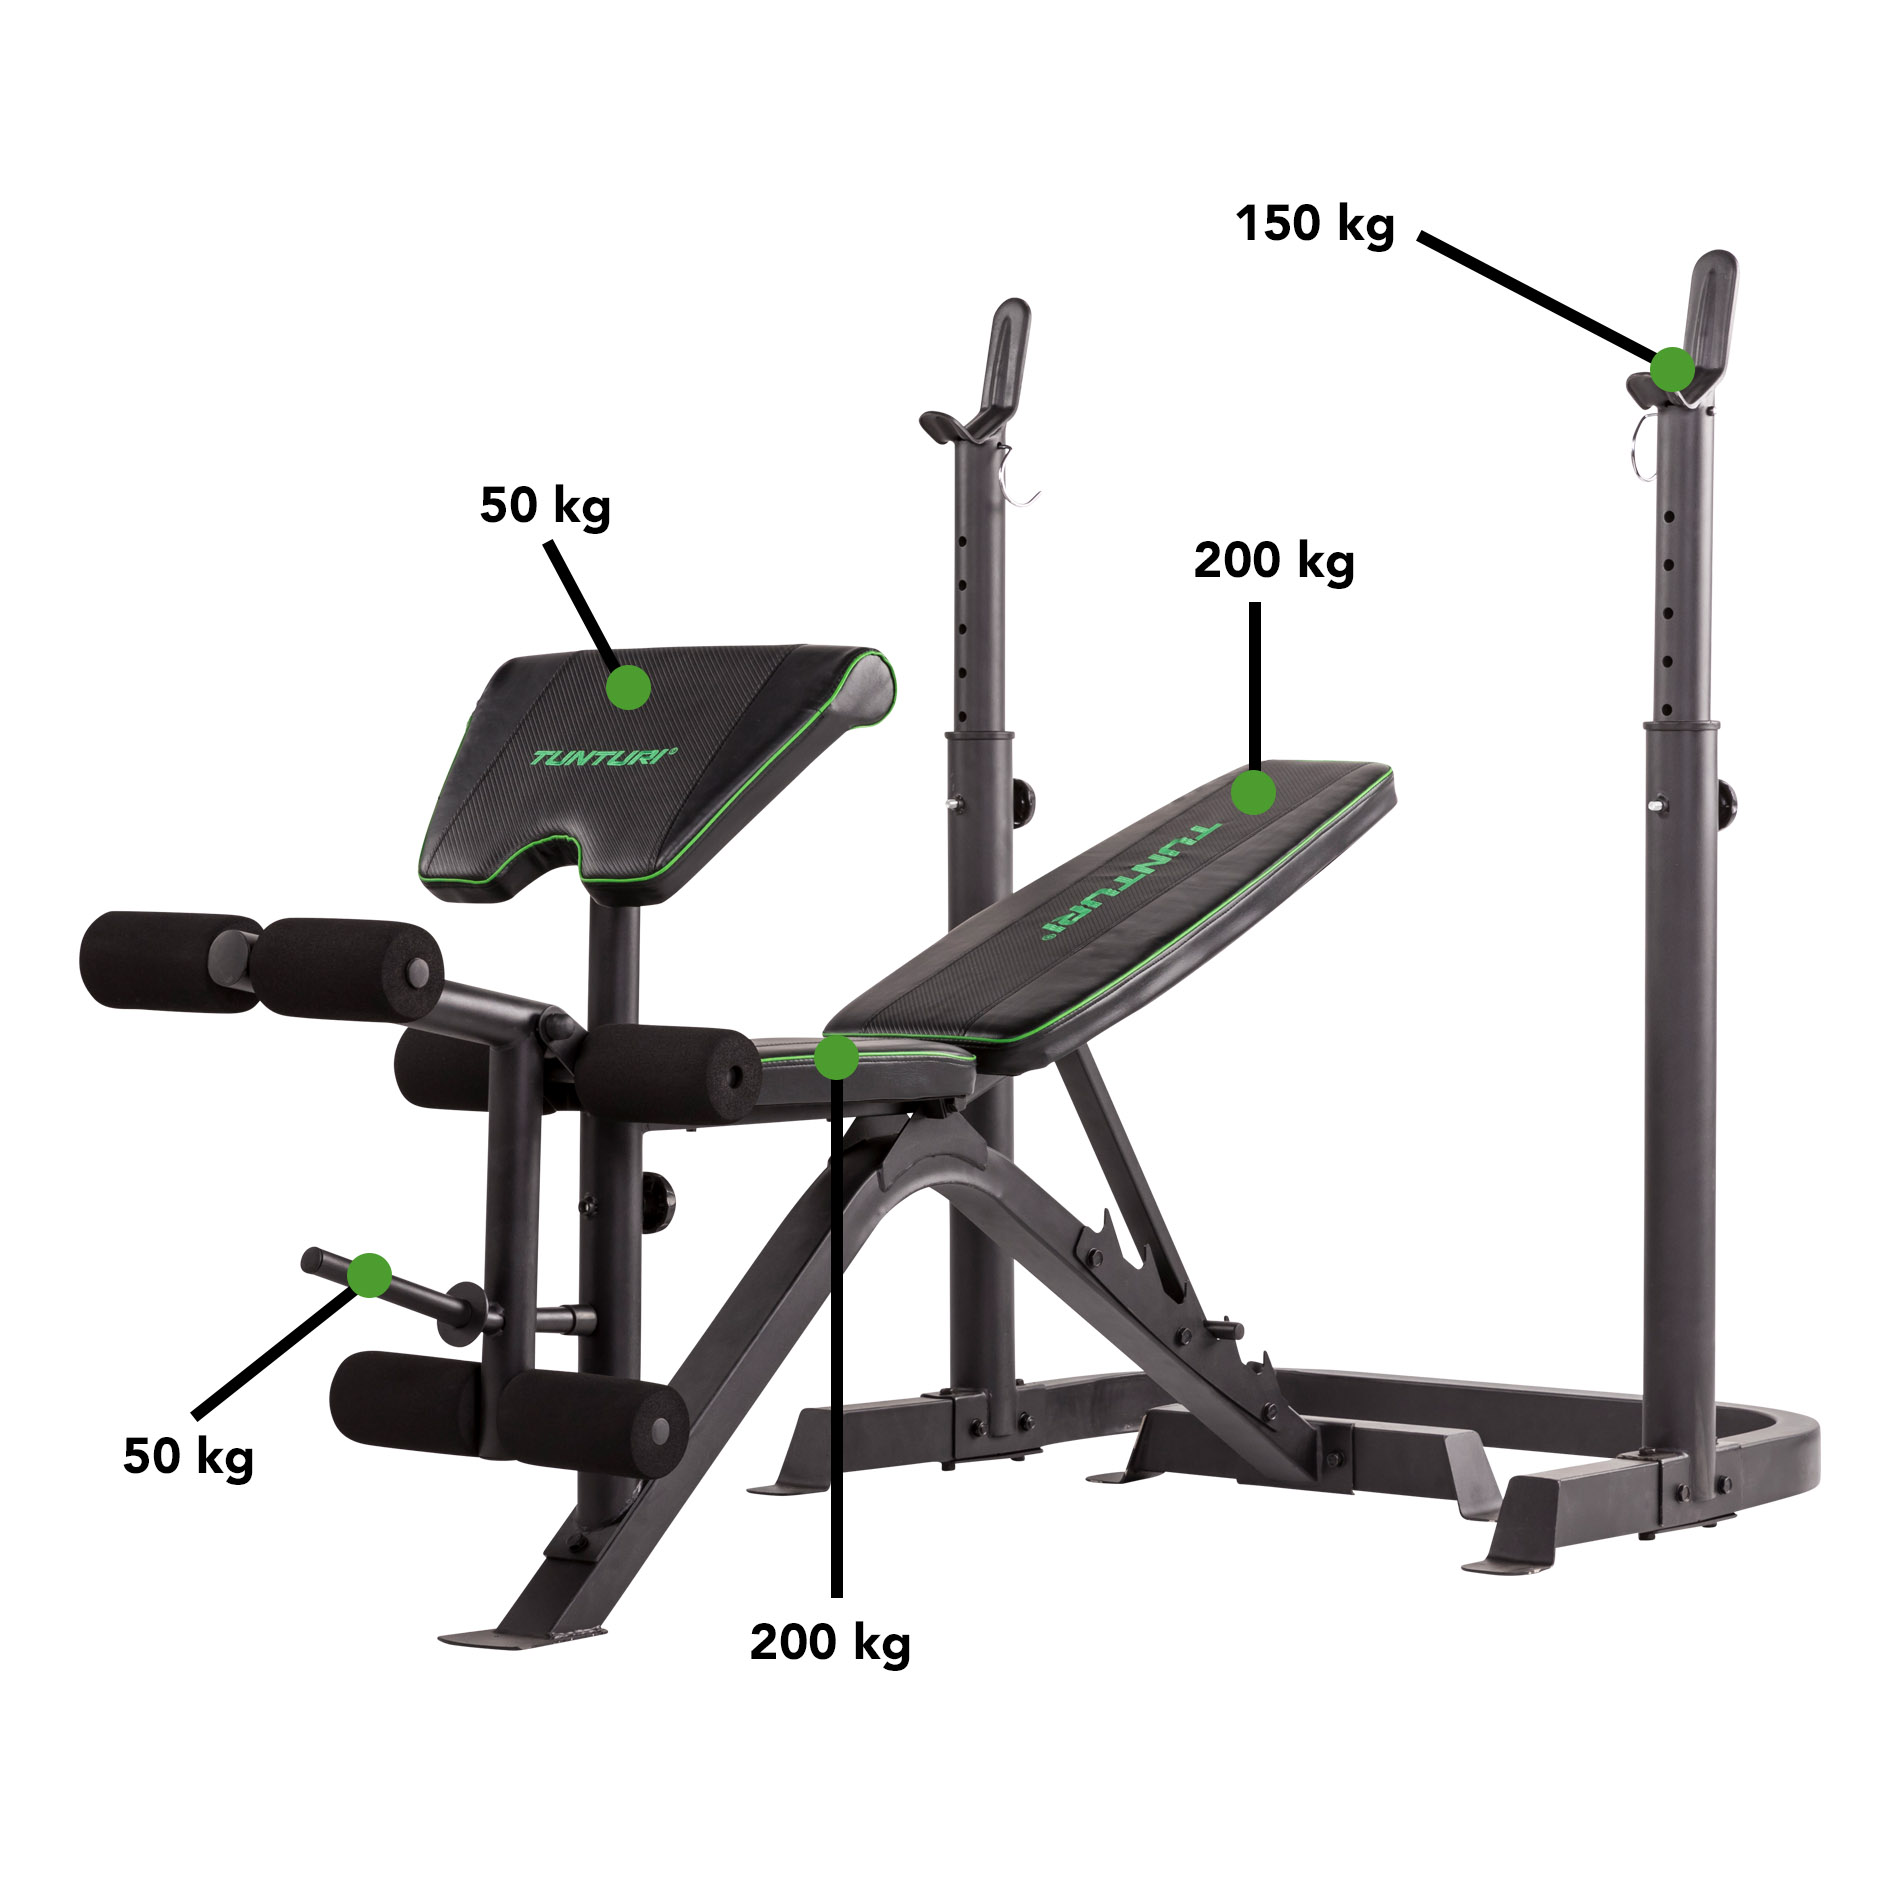 Adjustable Weight Bench with Barbell Rack Multi Position Function Weight Lifting 